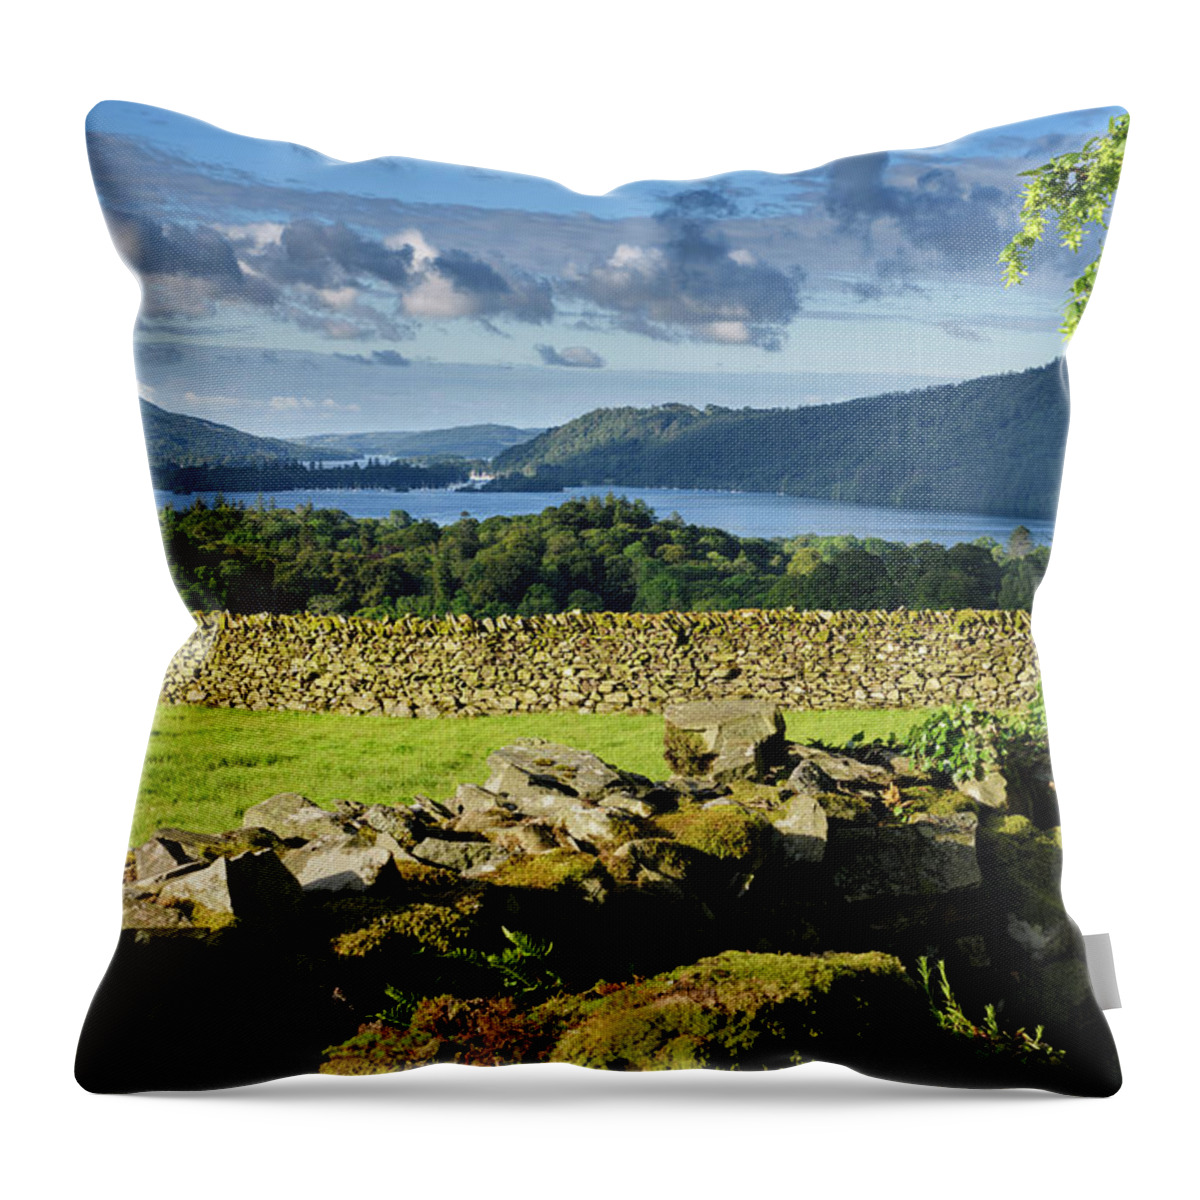 Drystone Throw Pillow featuring the photograph Drystone fences in morning light near Troutbeck overlooking Wind by Reimar Gaertner